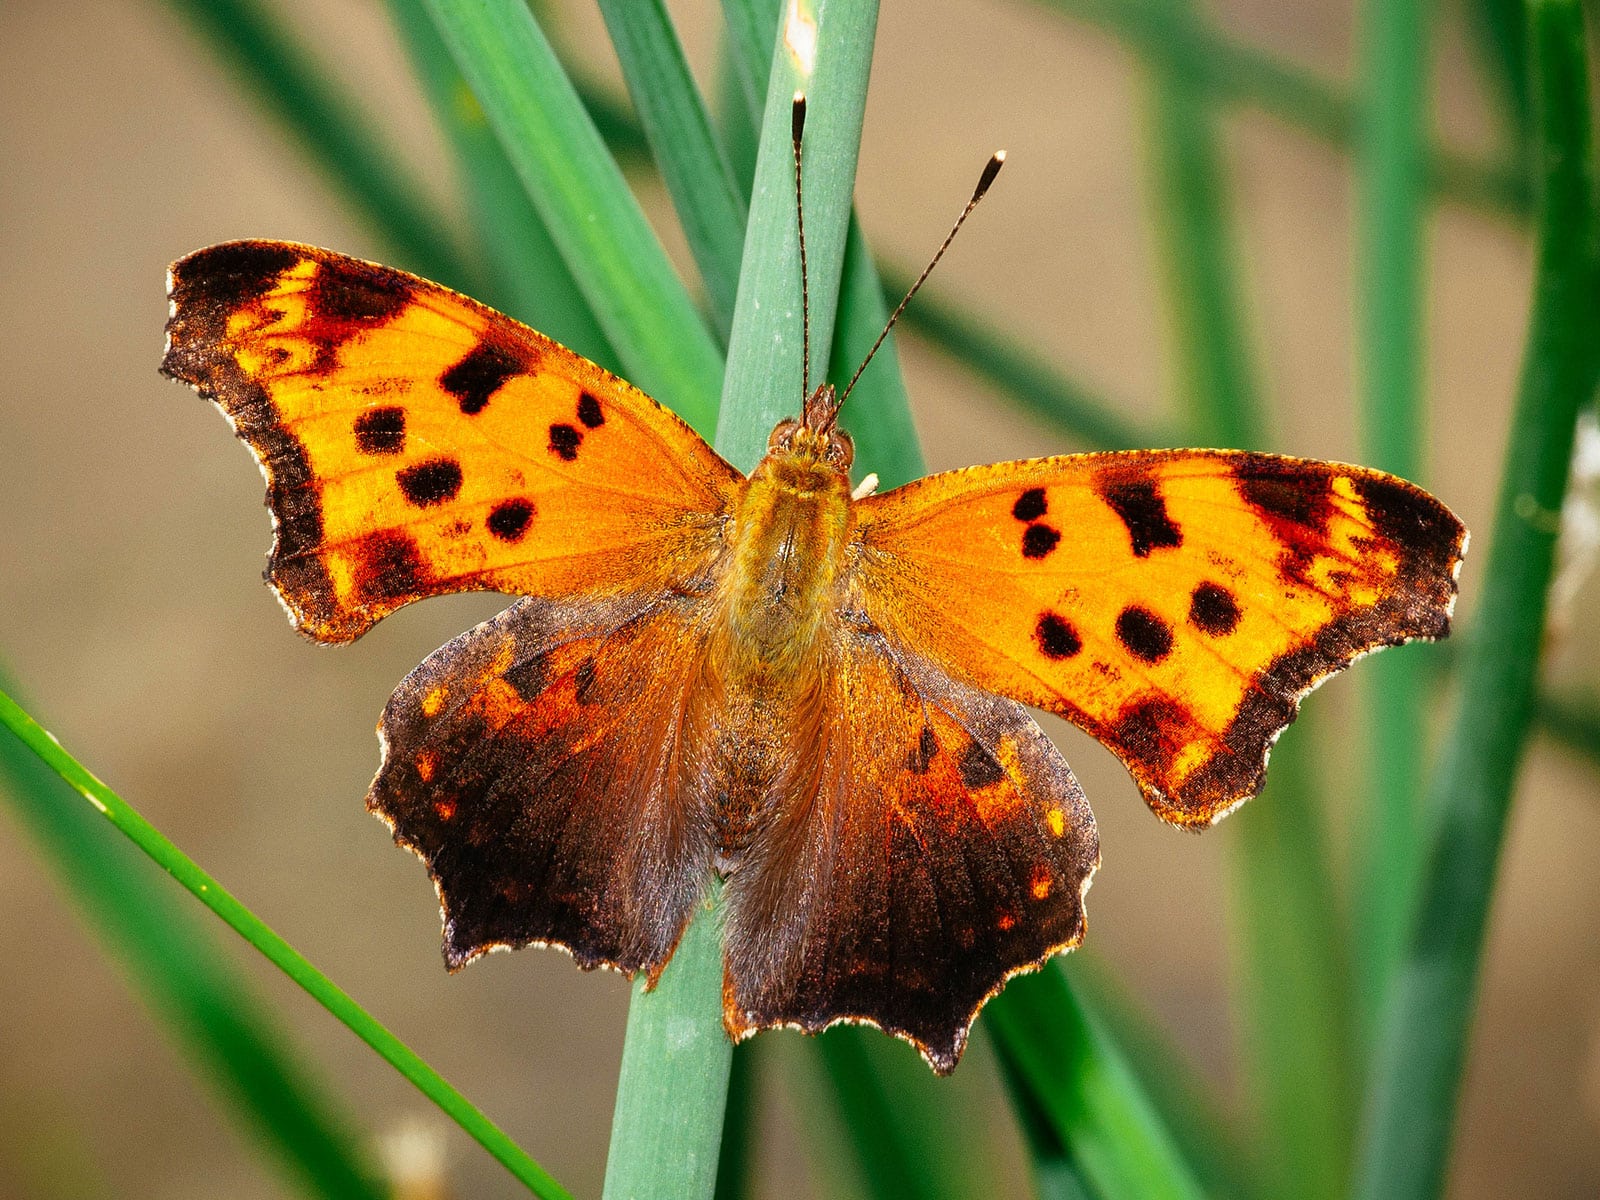 Eastern comma butterfly resting on a green stem